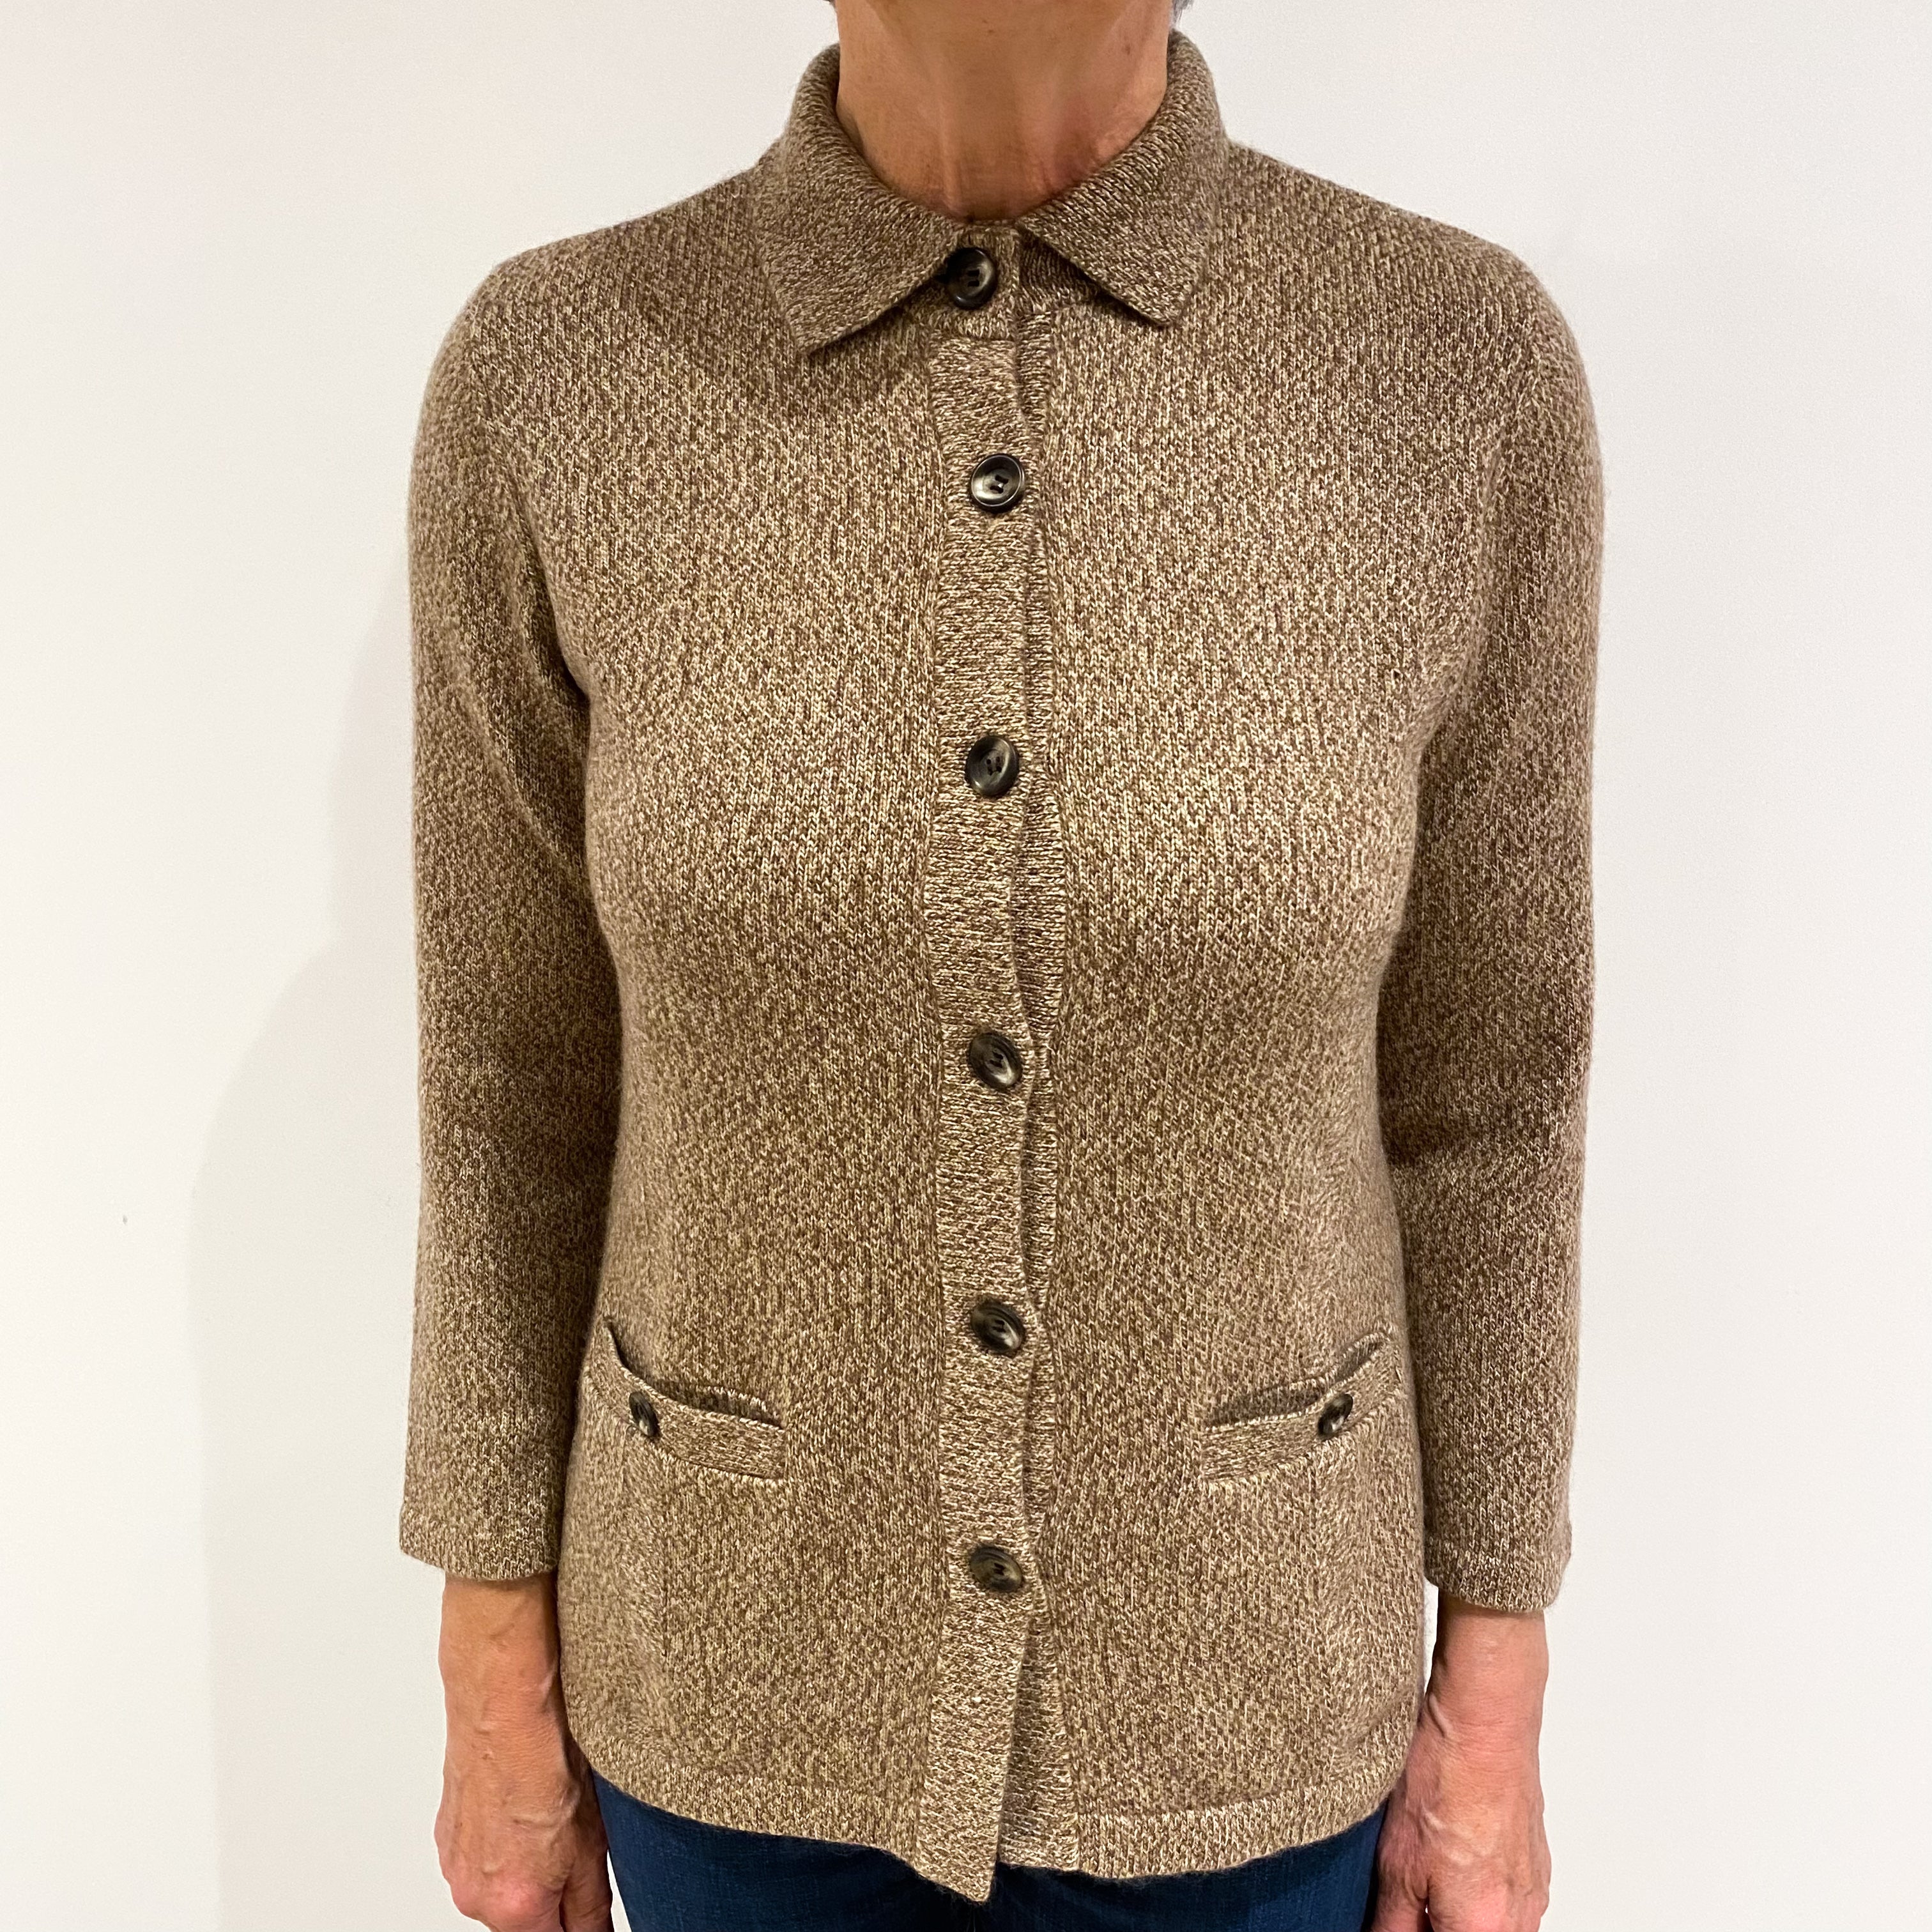 Toffee Brown Marl Cashmere Collared Cardigan Jacket Medium with Front Pockets